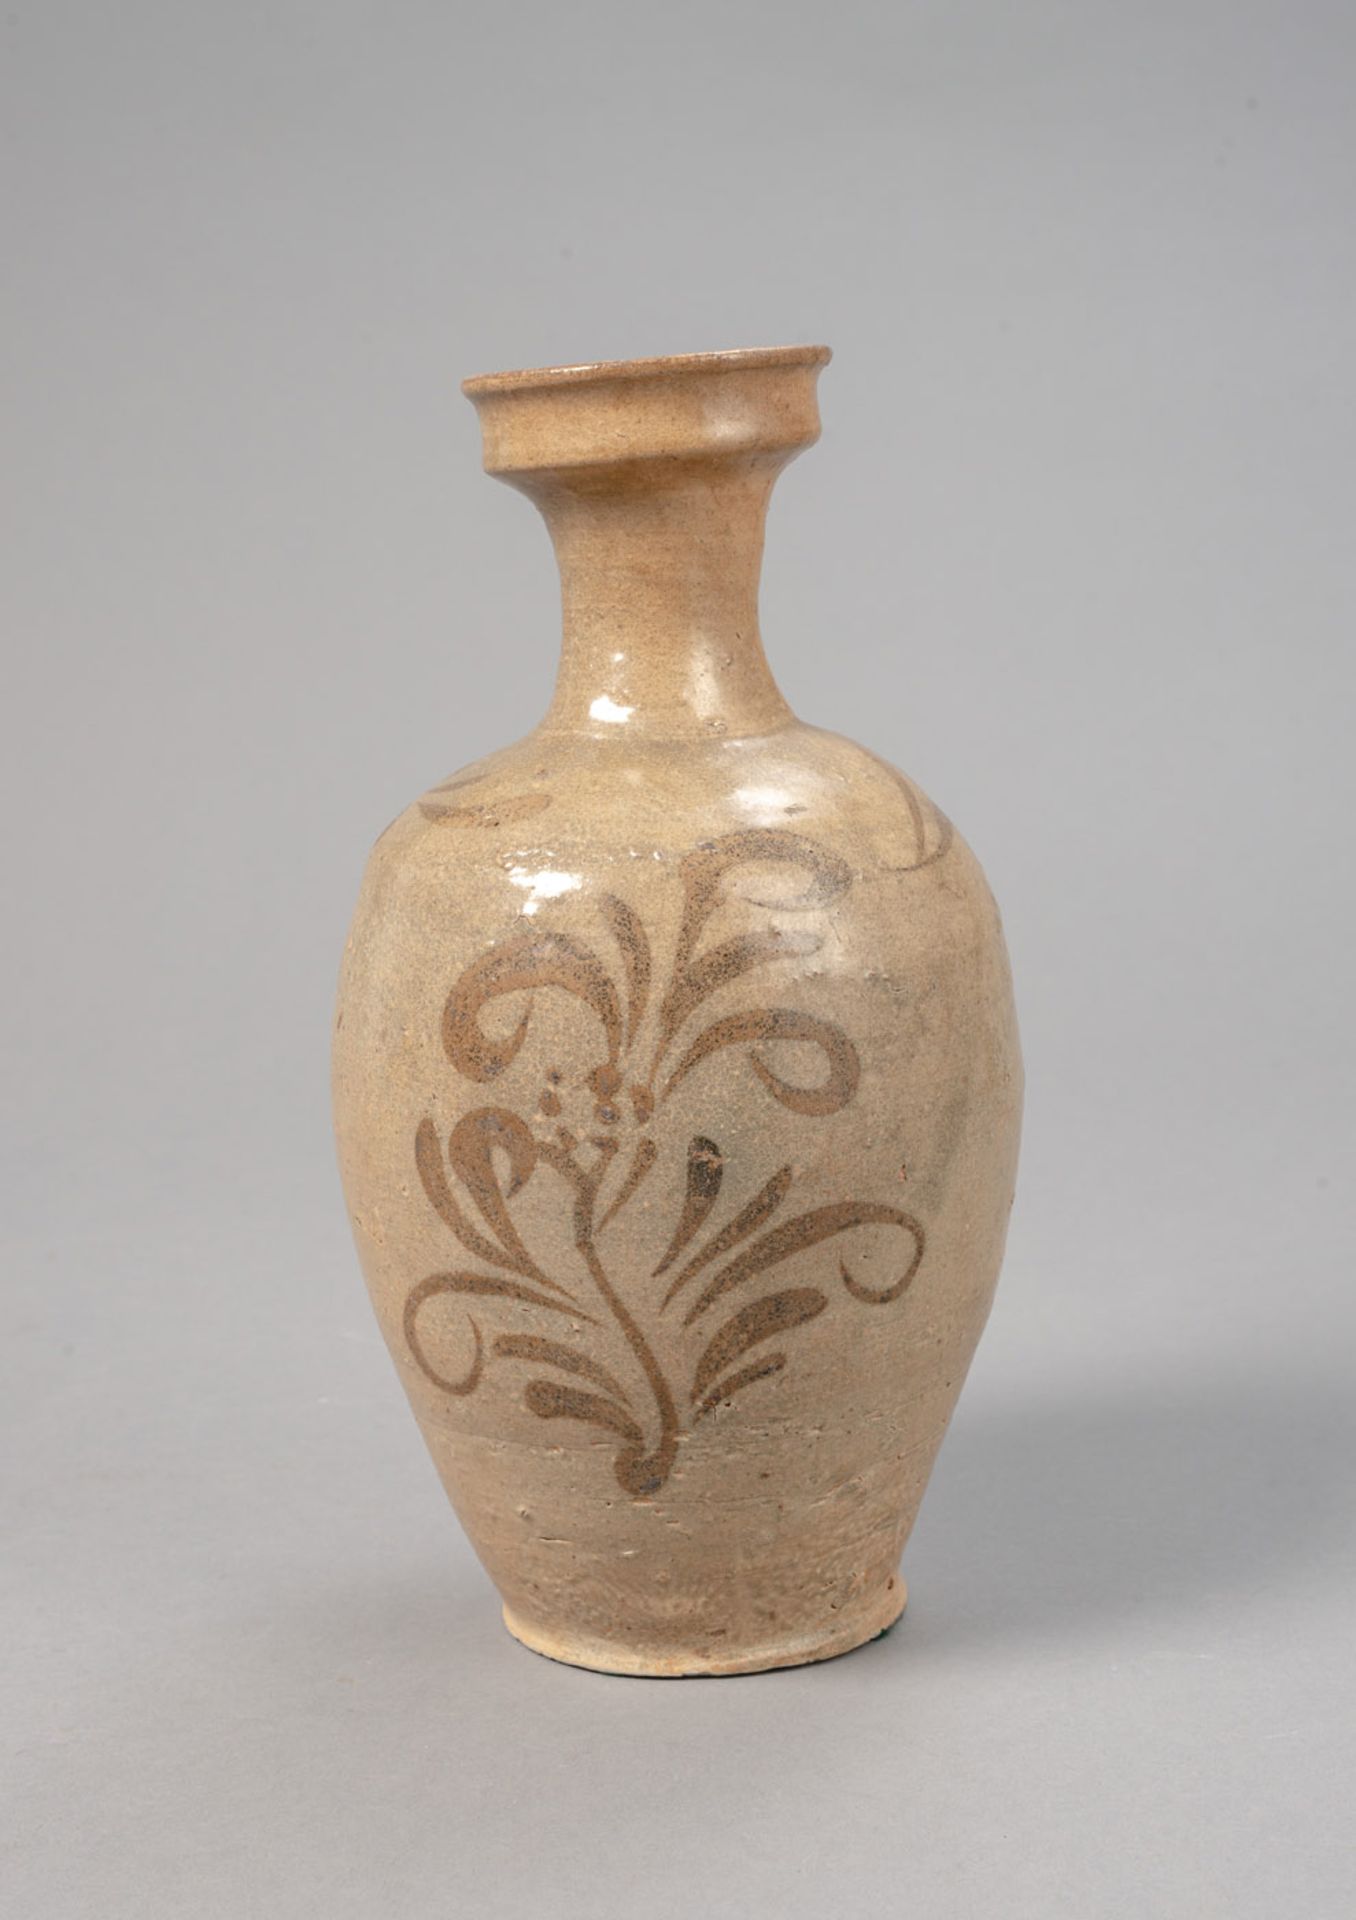 A STONEWARE BUNCHEONG VASE WITH FLORAL DECORATION - Image 3 of 4